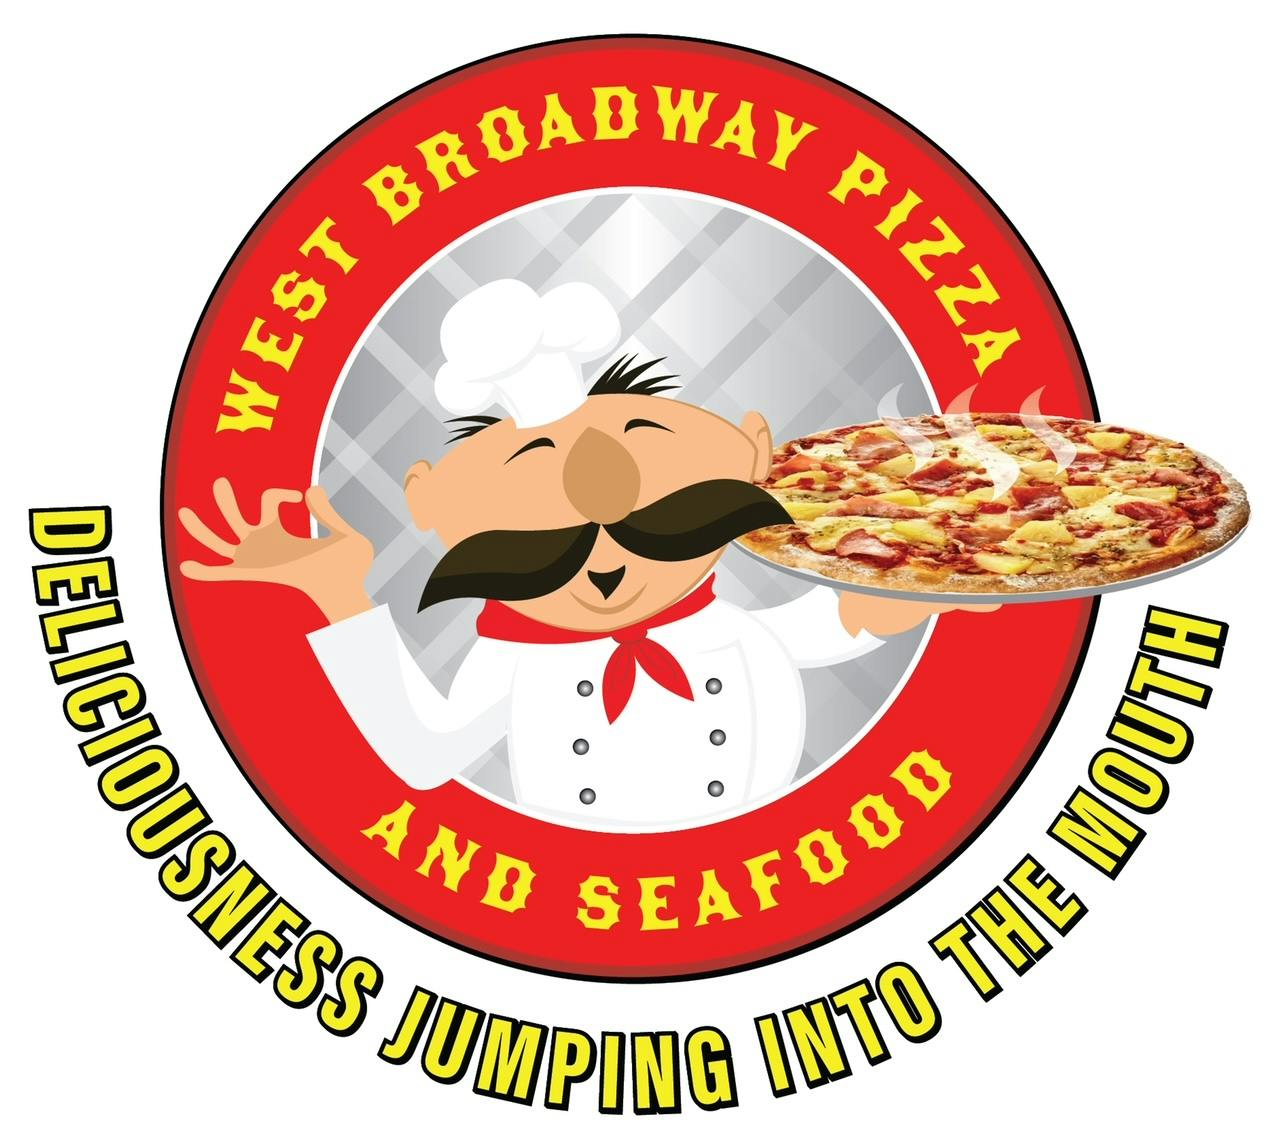 West Broadway Pizza & Seafood